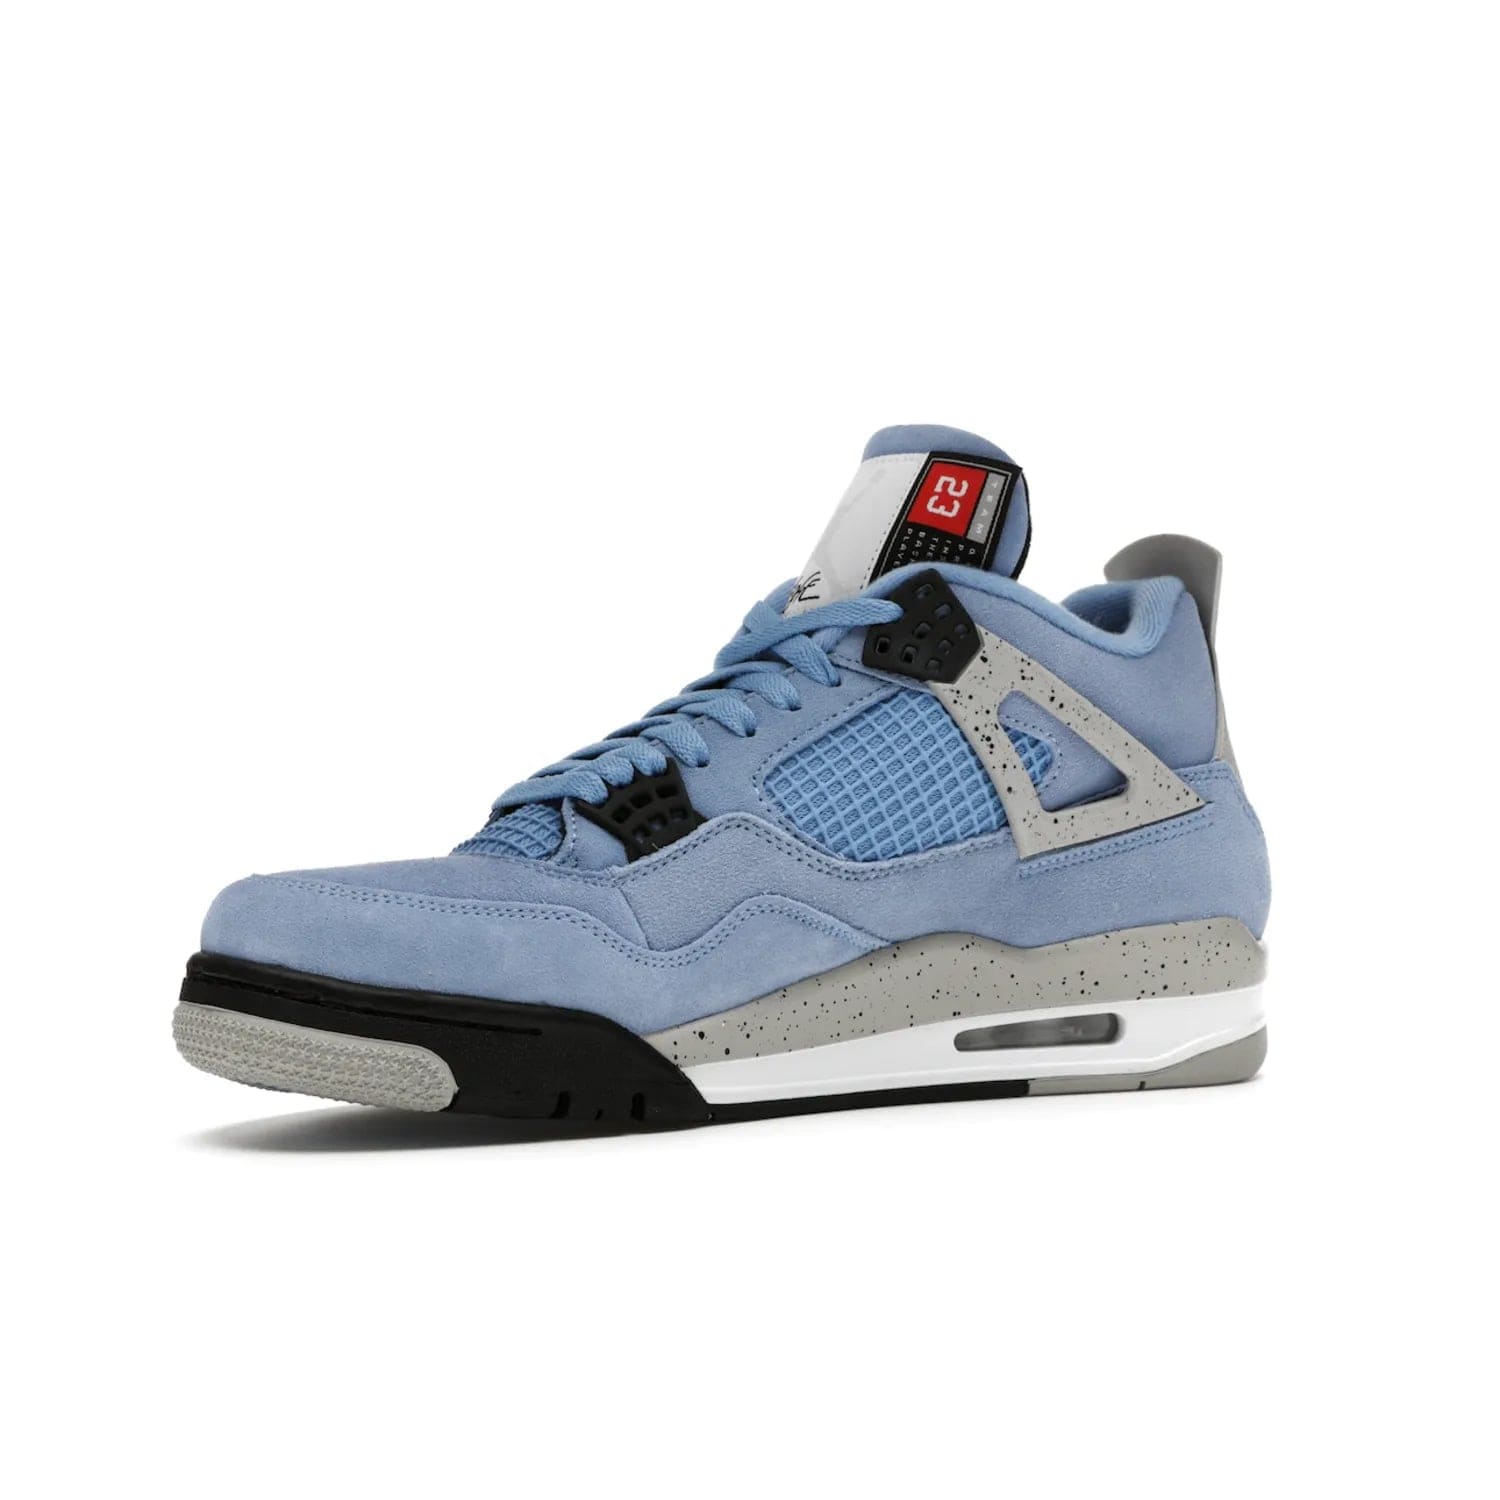 Jordan 4 Retro University Blue - Image 16 - Only at www.BallersClubKickz.com - The Air Jordan 4 University Blue honors MJ's alma mater. Rich University Blue suede, panels of netting, and Cement Grey speckled eyelets give this design an edgy look. Features a black, white and Tech Grey sole with a clear Air unit and two woven labels on the tongue. Jumpman logo & Team Jordan jock tag included. Released April 2021.